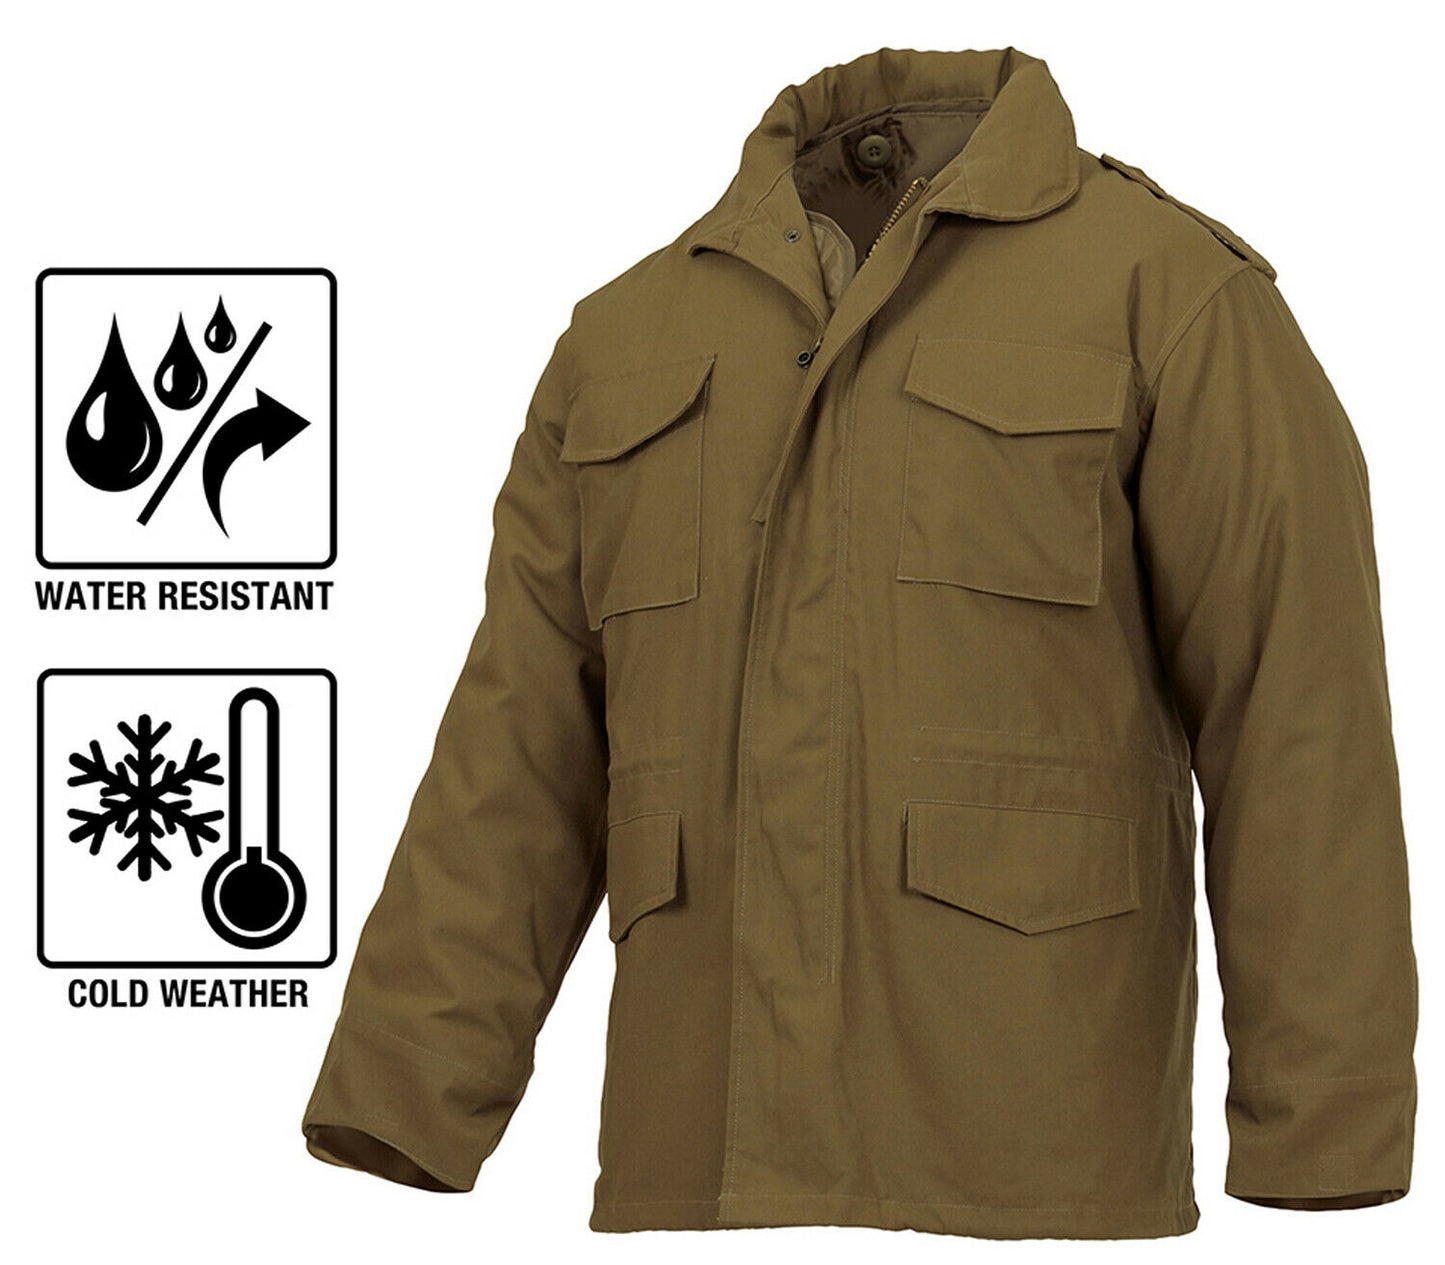 Rothco M-65 Field Jacket With Liner - Coyote Brown